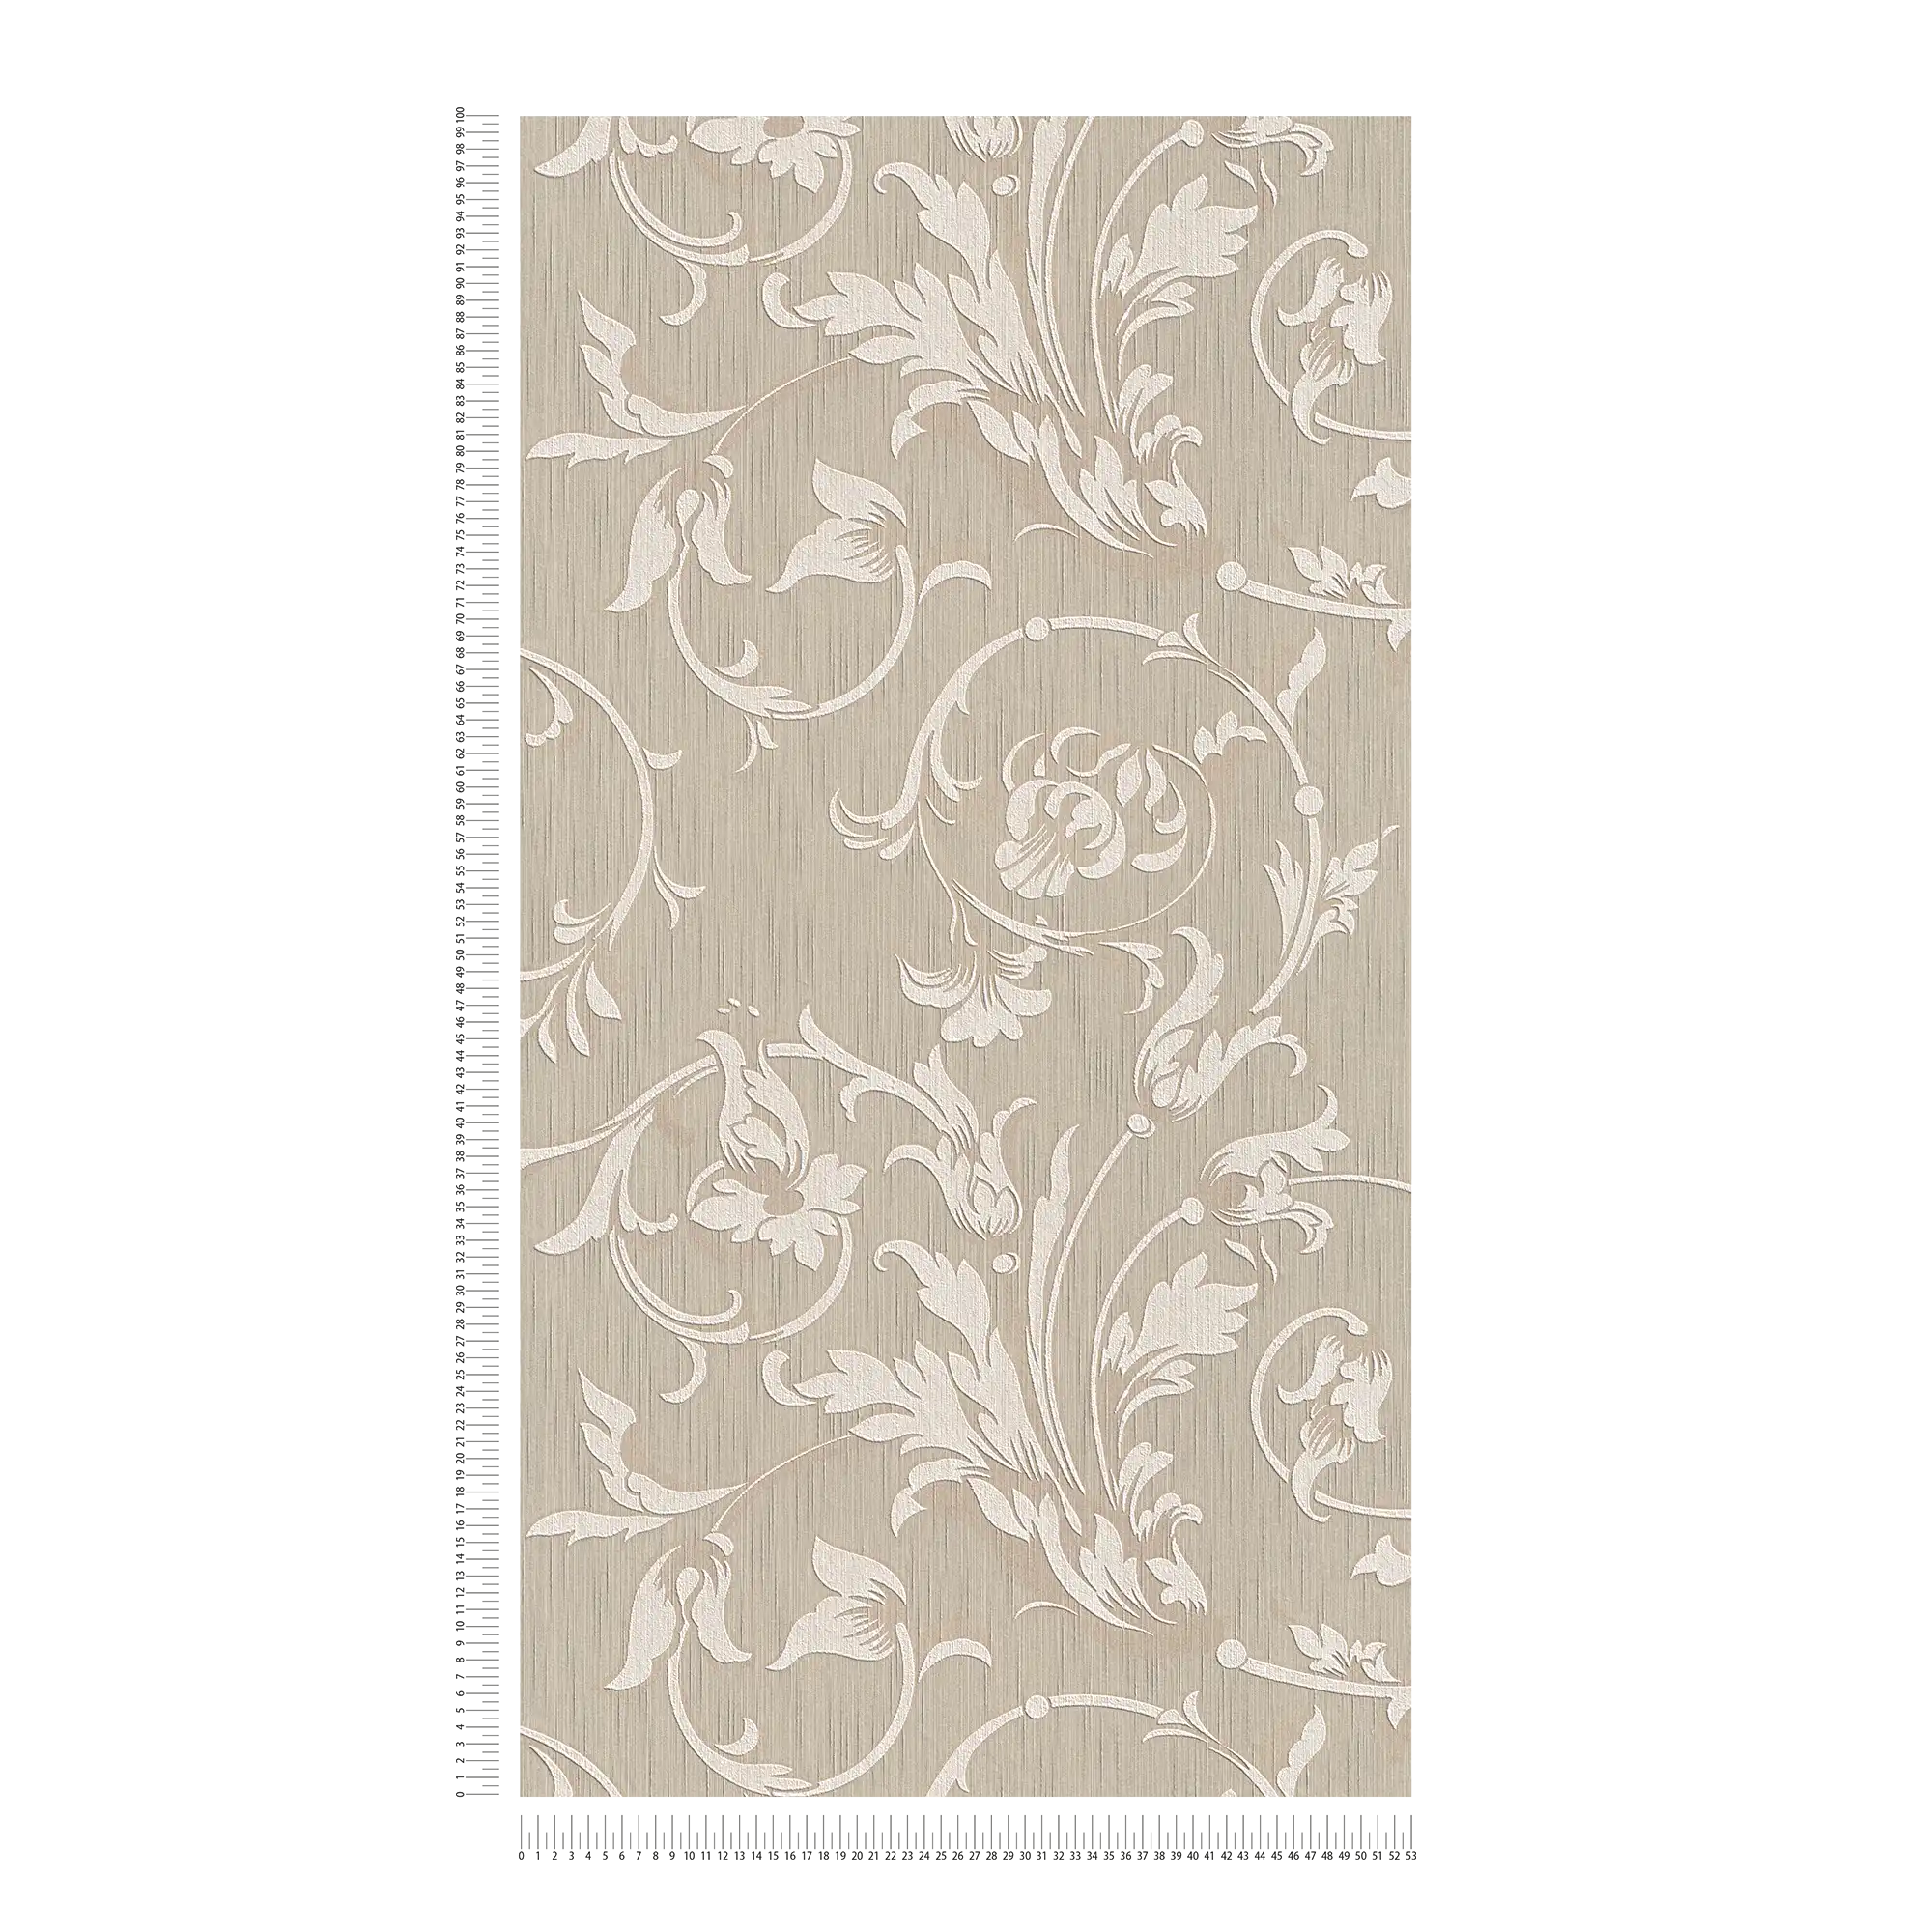             Wallpaper colonioal style with floral ornaments - beige
        